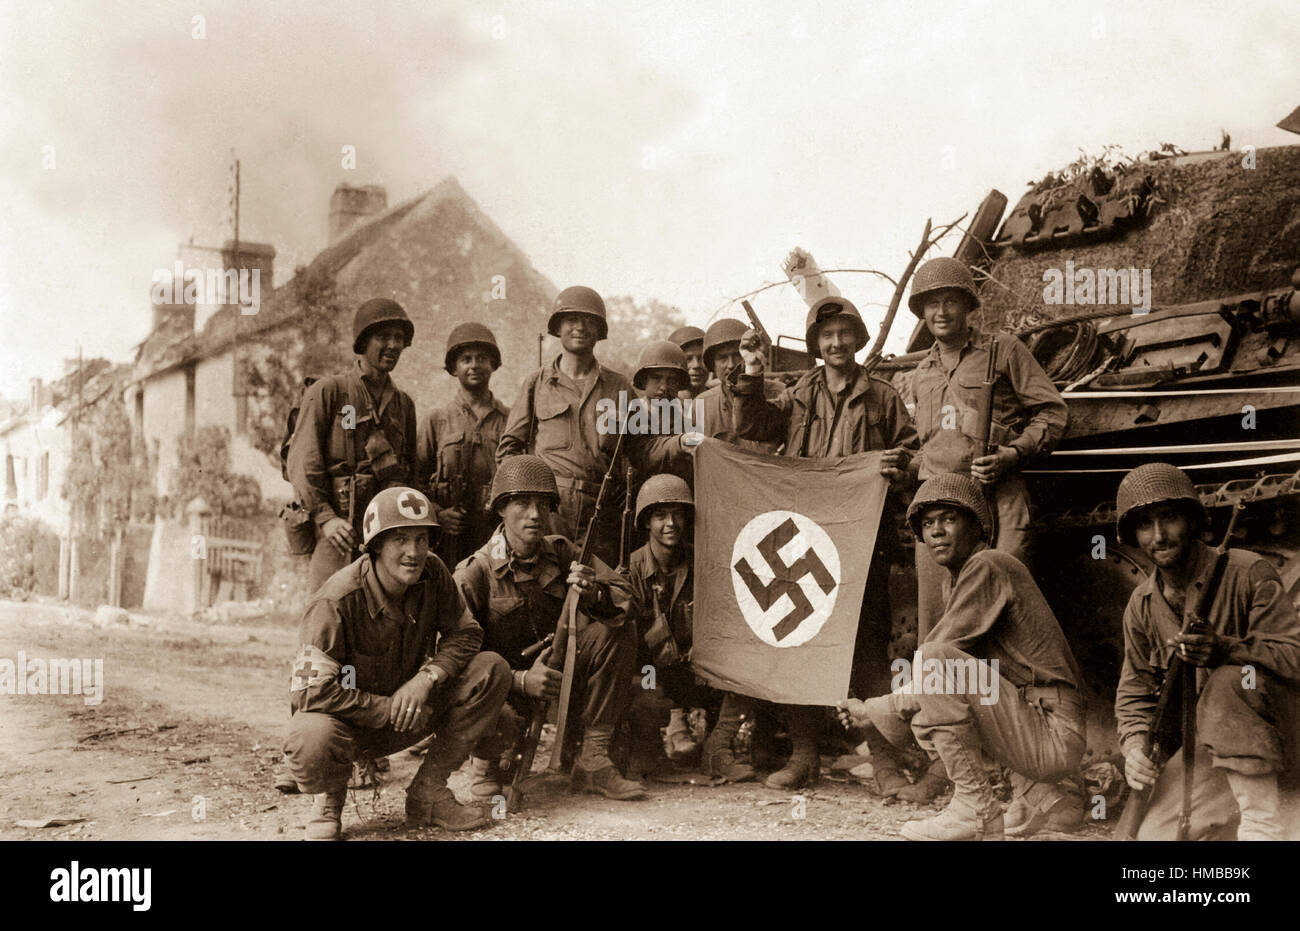 Lined up in front of a wrecked German tank and displaying a captured swastika, is group of Yank infantrymen who were left behind to 'mop-up' in Chambois, France, last stronghold of the Nazis in the Falaise Gap area.  August 20, 1944. Tomko.  (Army Surgeon General) Stock Photo